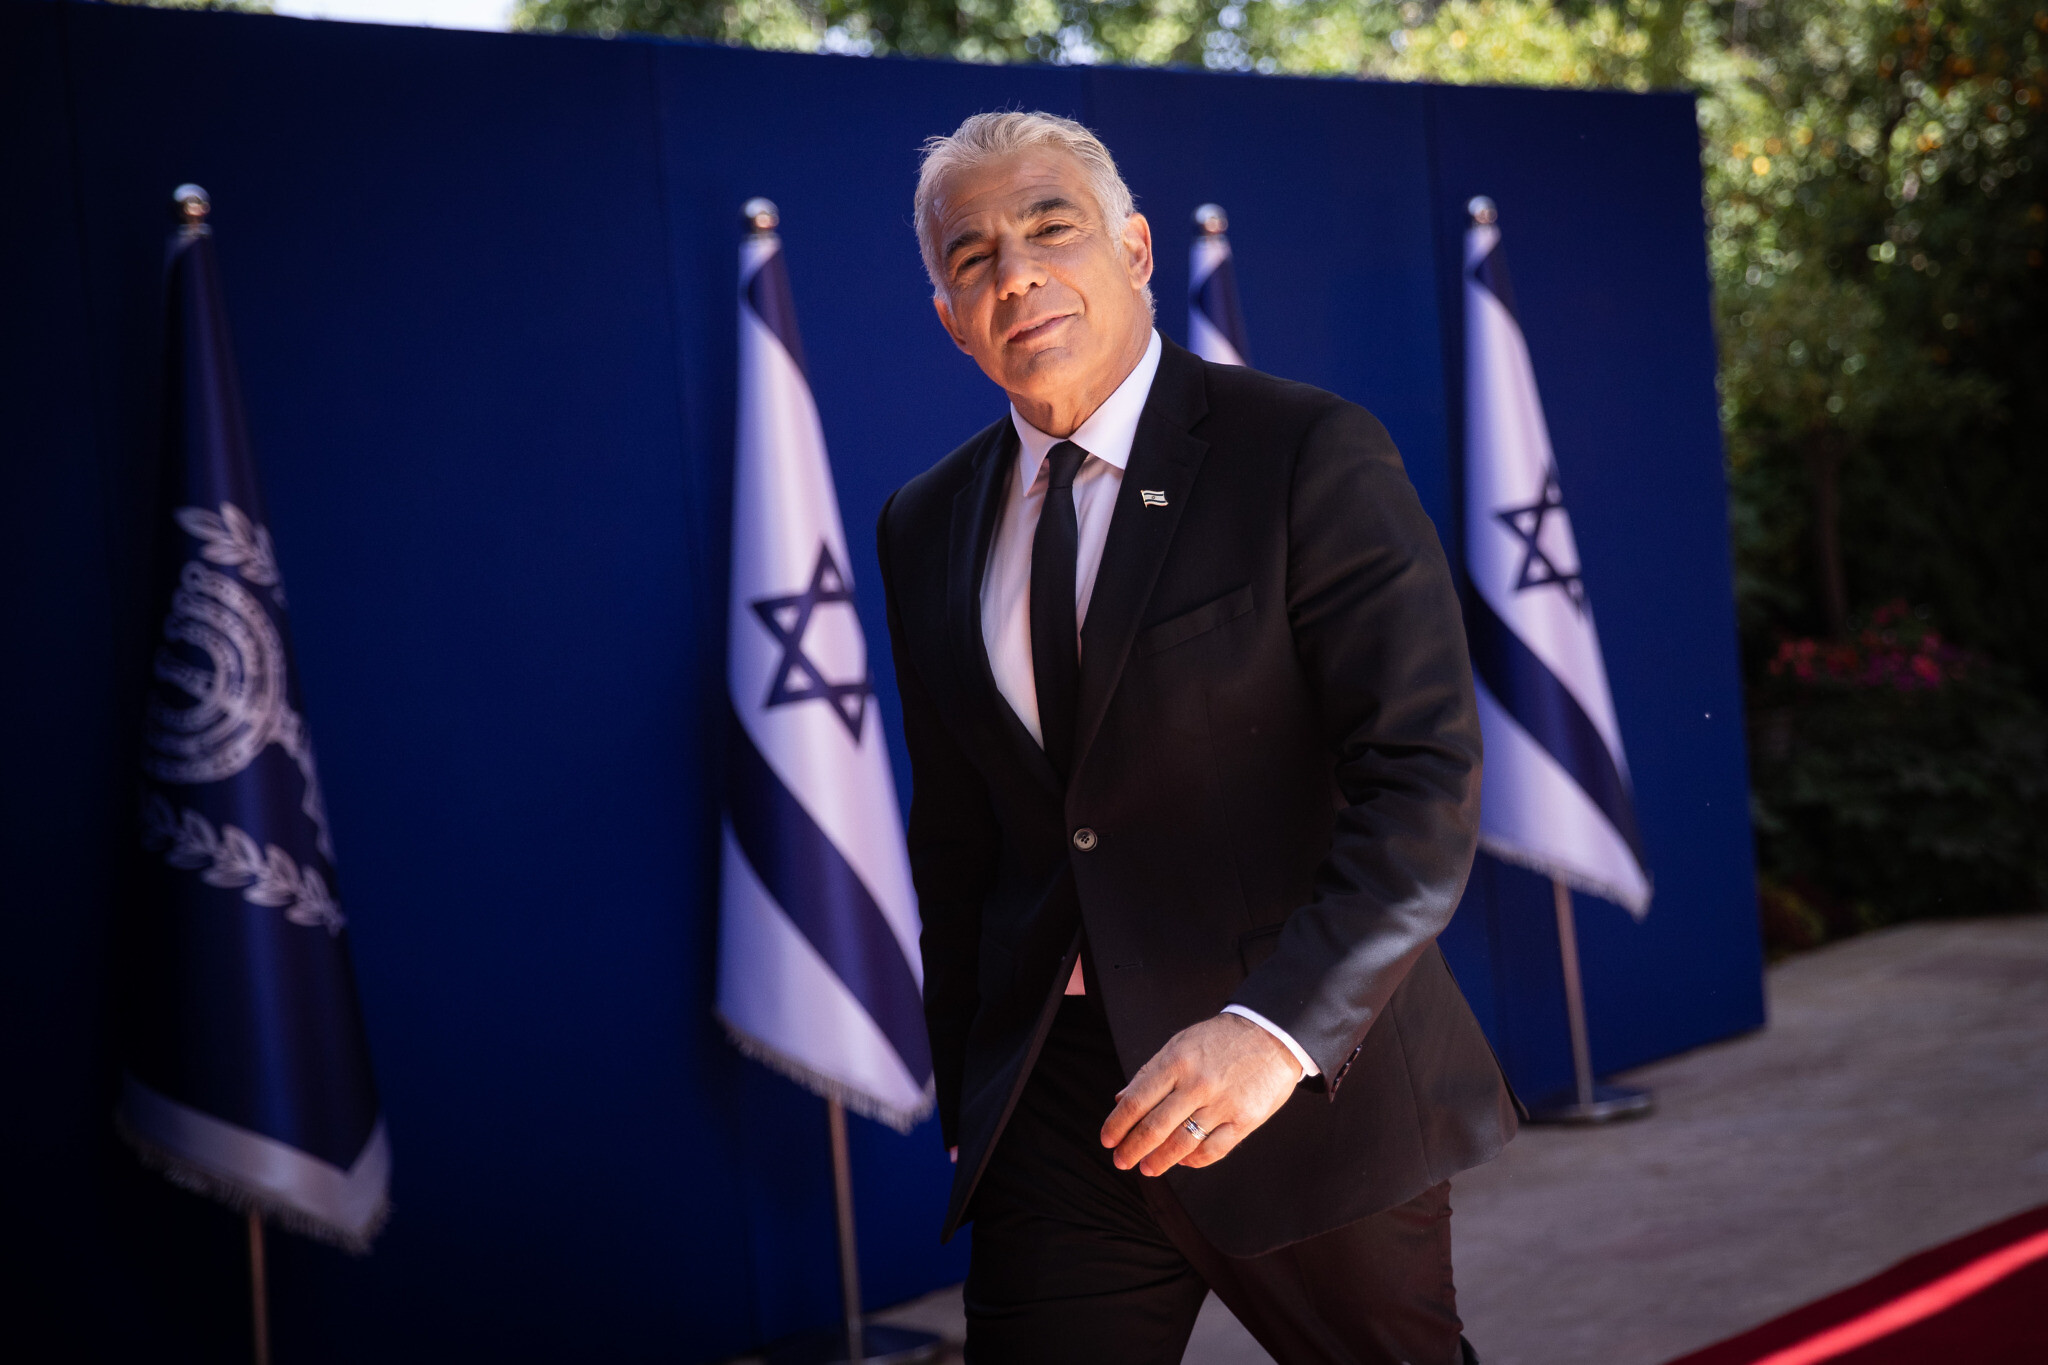 Israeli Foreign Minister Lapid is going to the UAE on his first visit